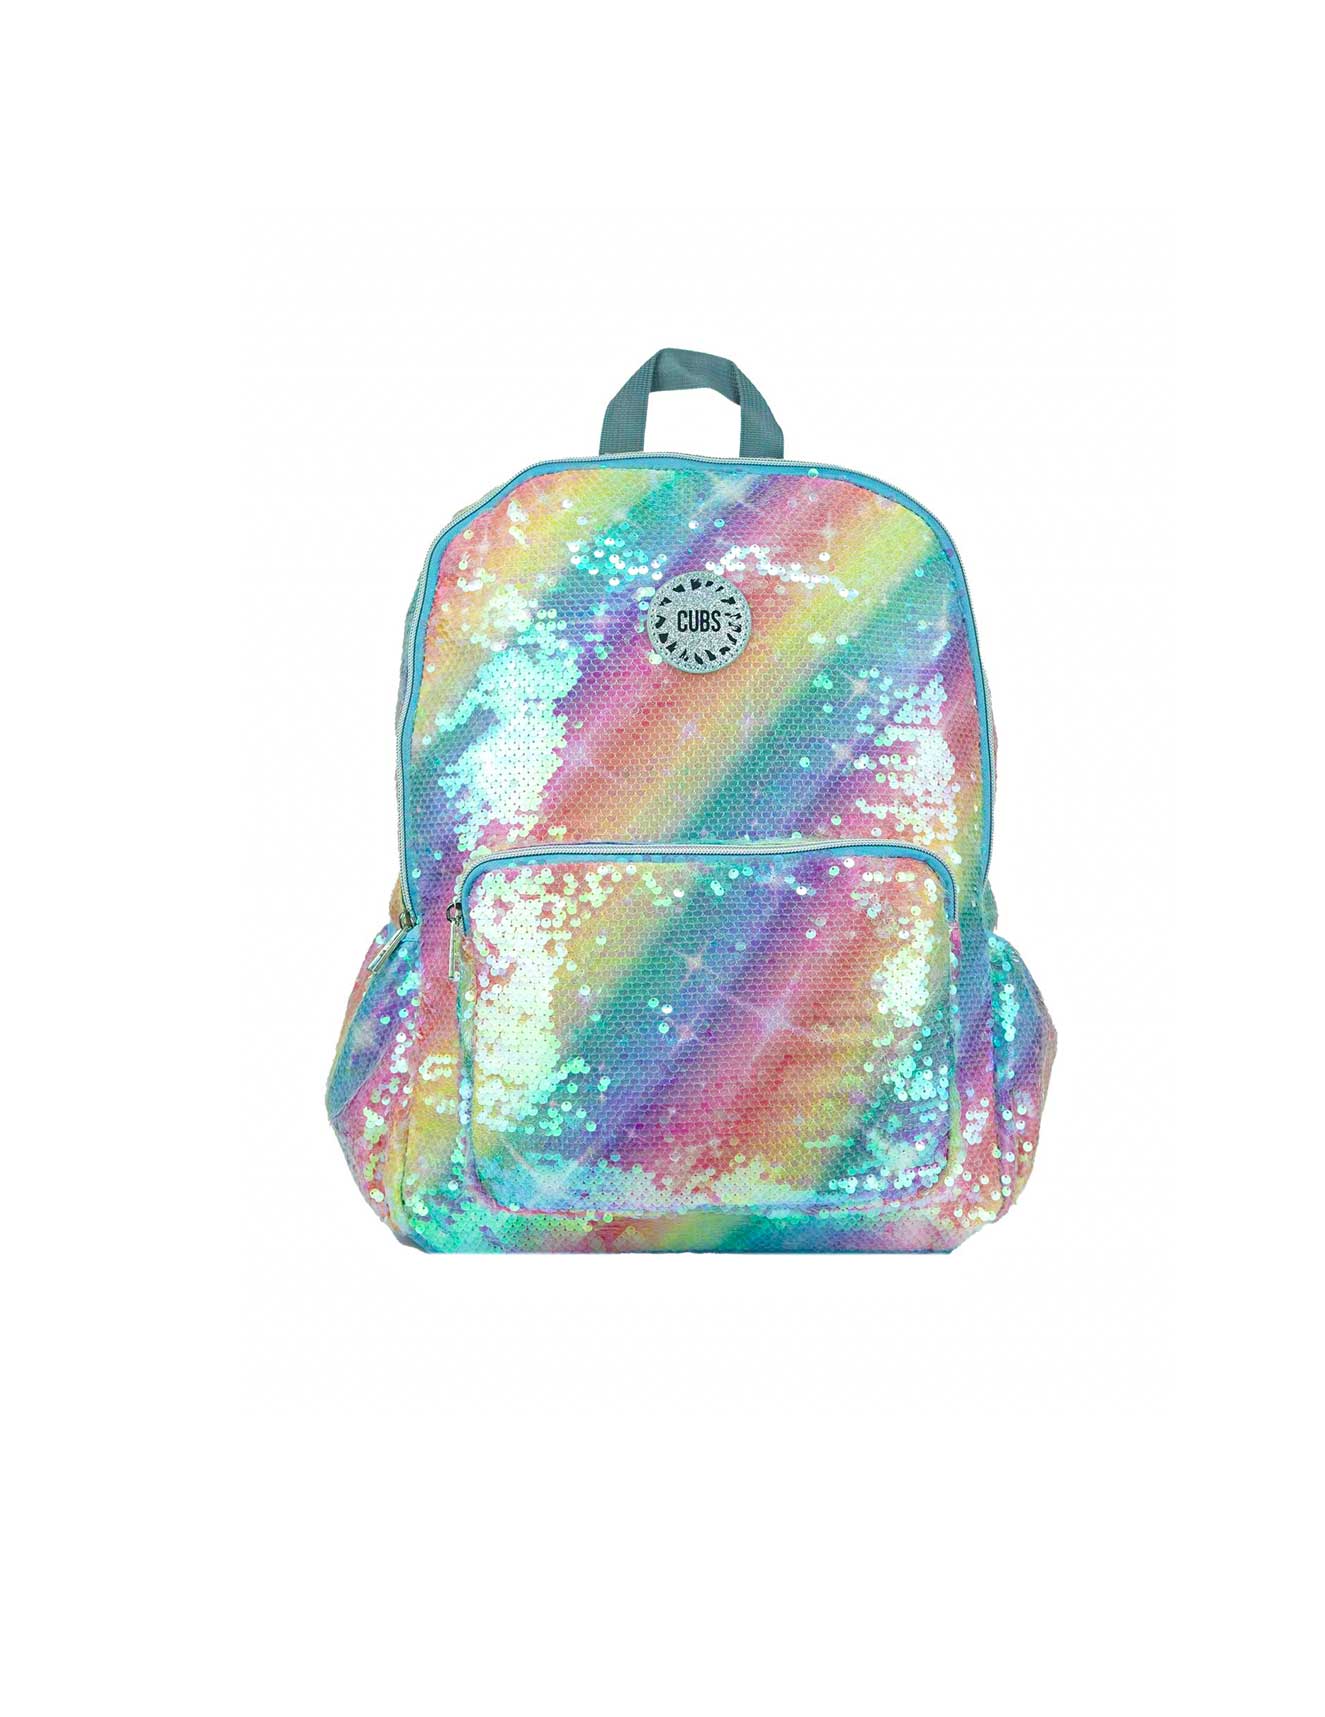 Rainbow Sequin Backpack | CUBS | Go Places